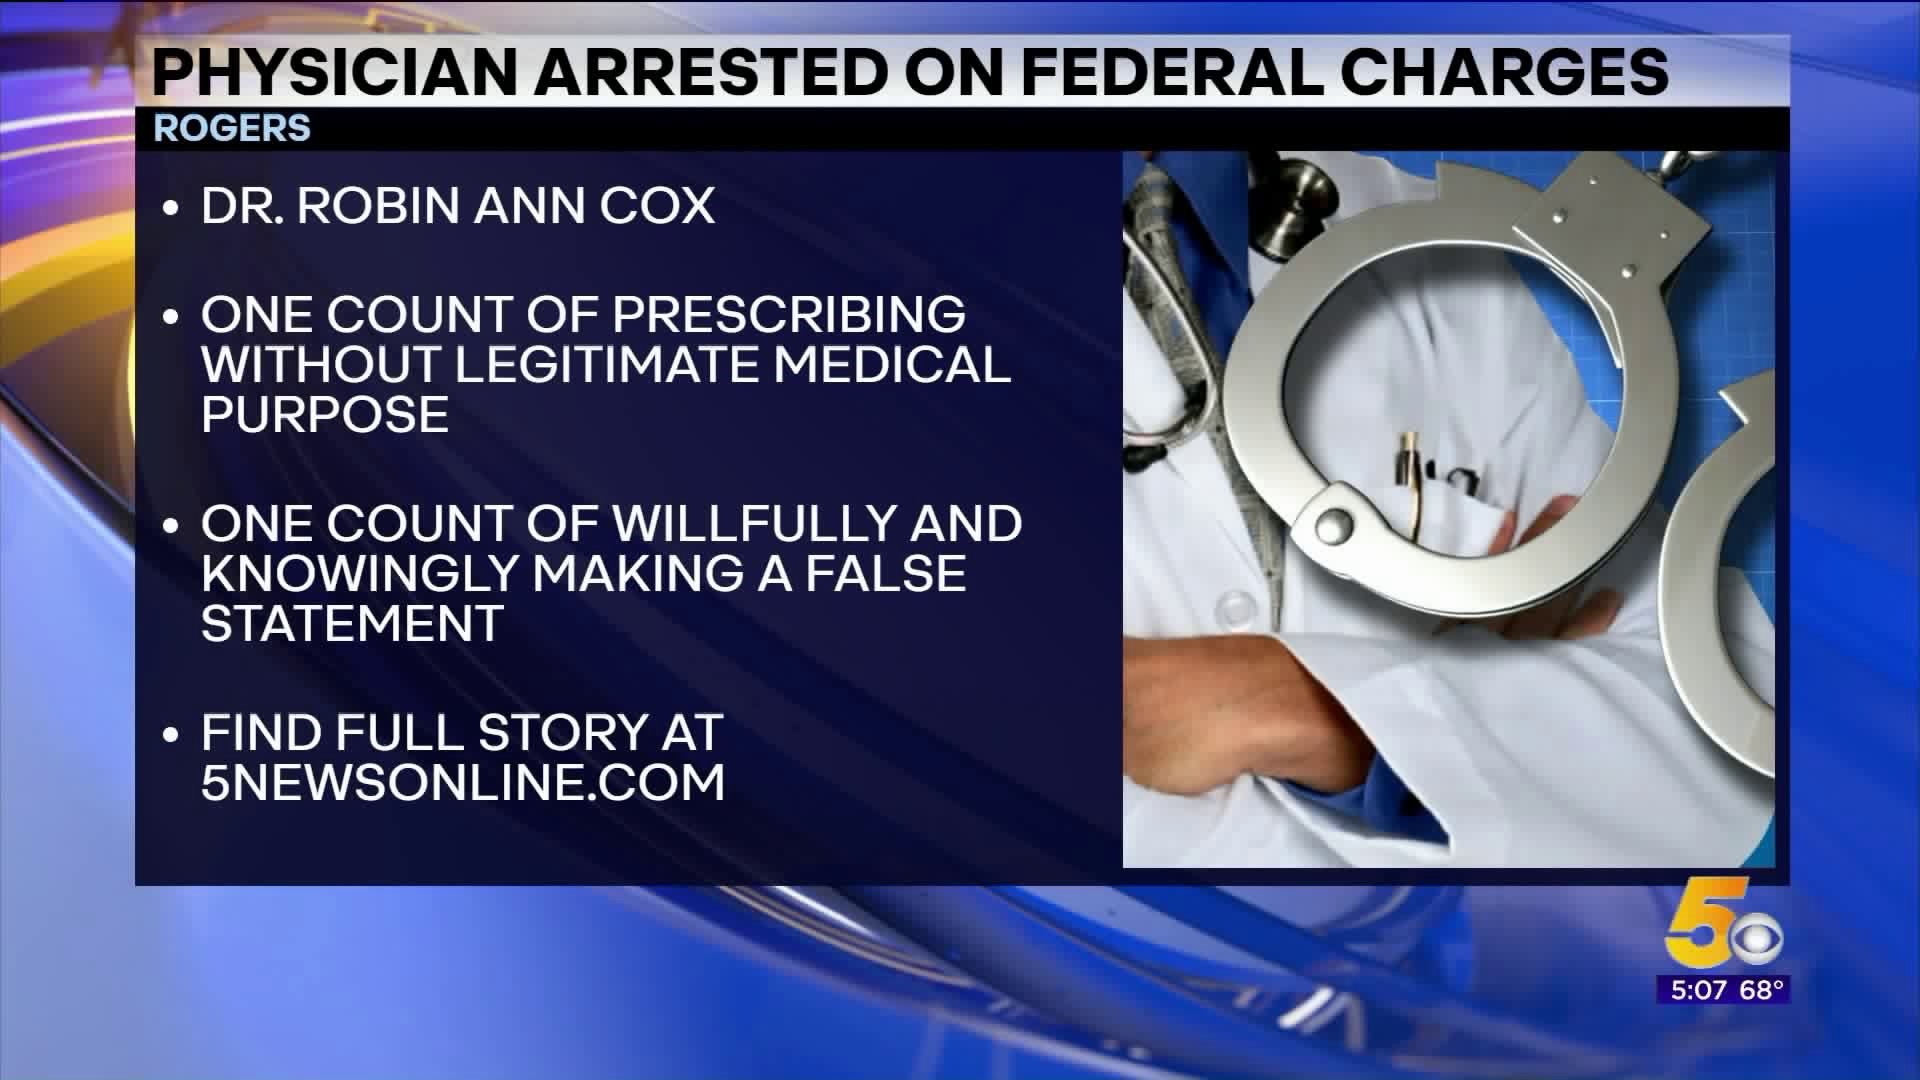 Rogers Doctor Arrested on Federal Charges